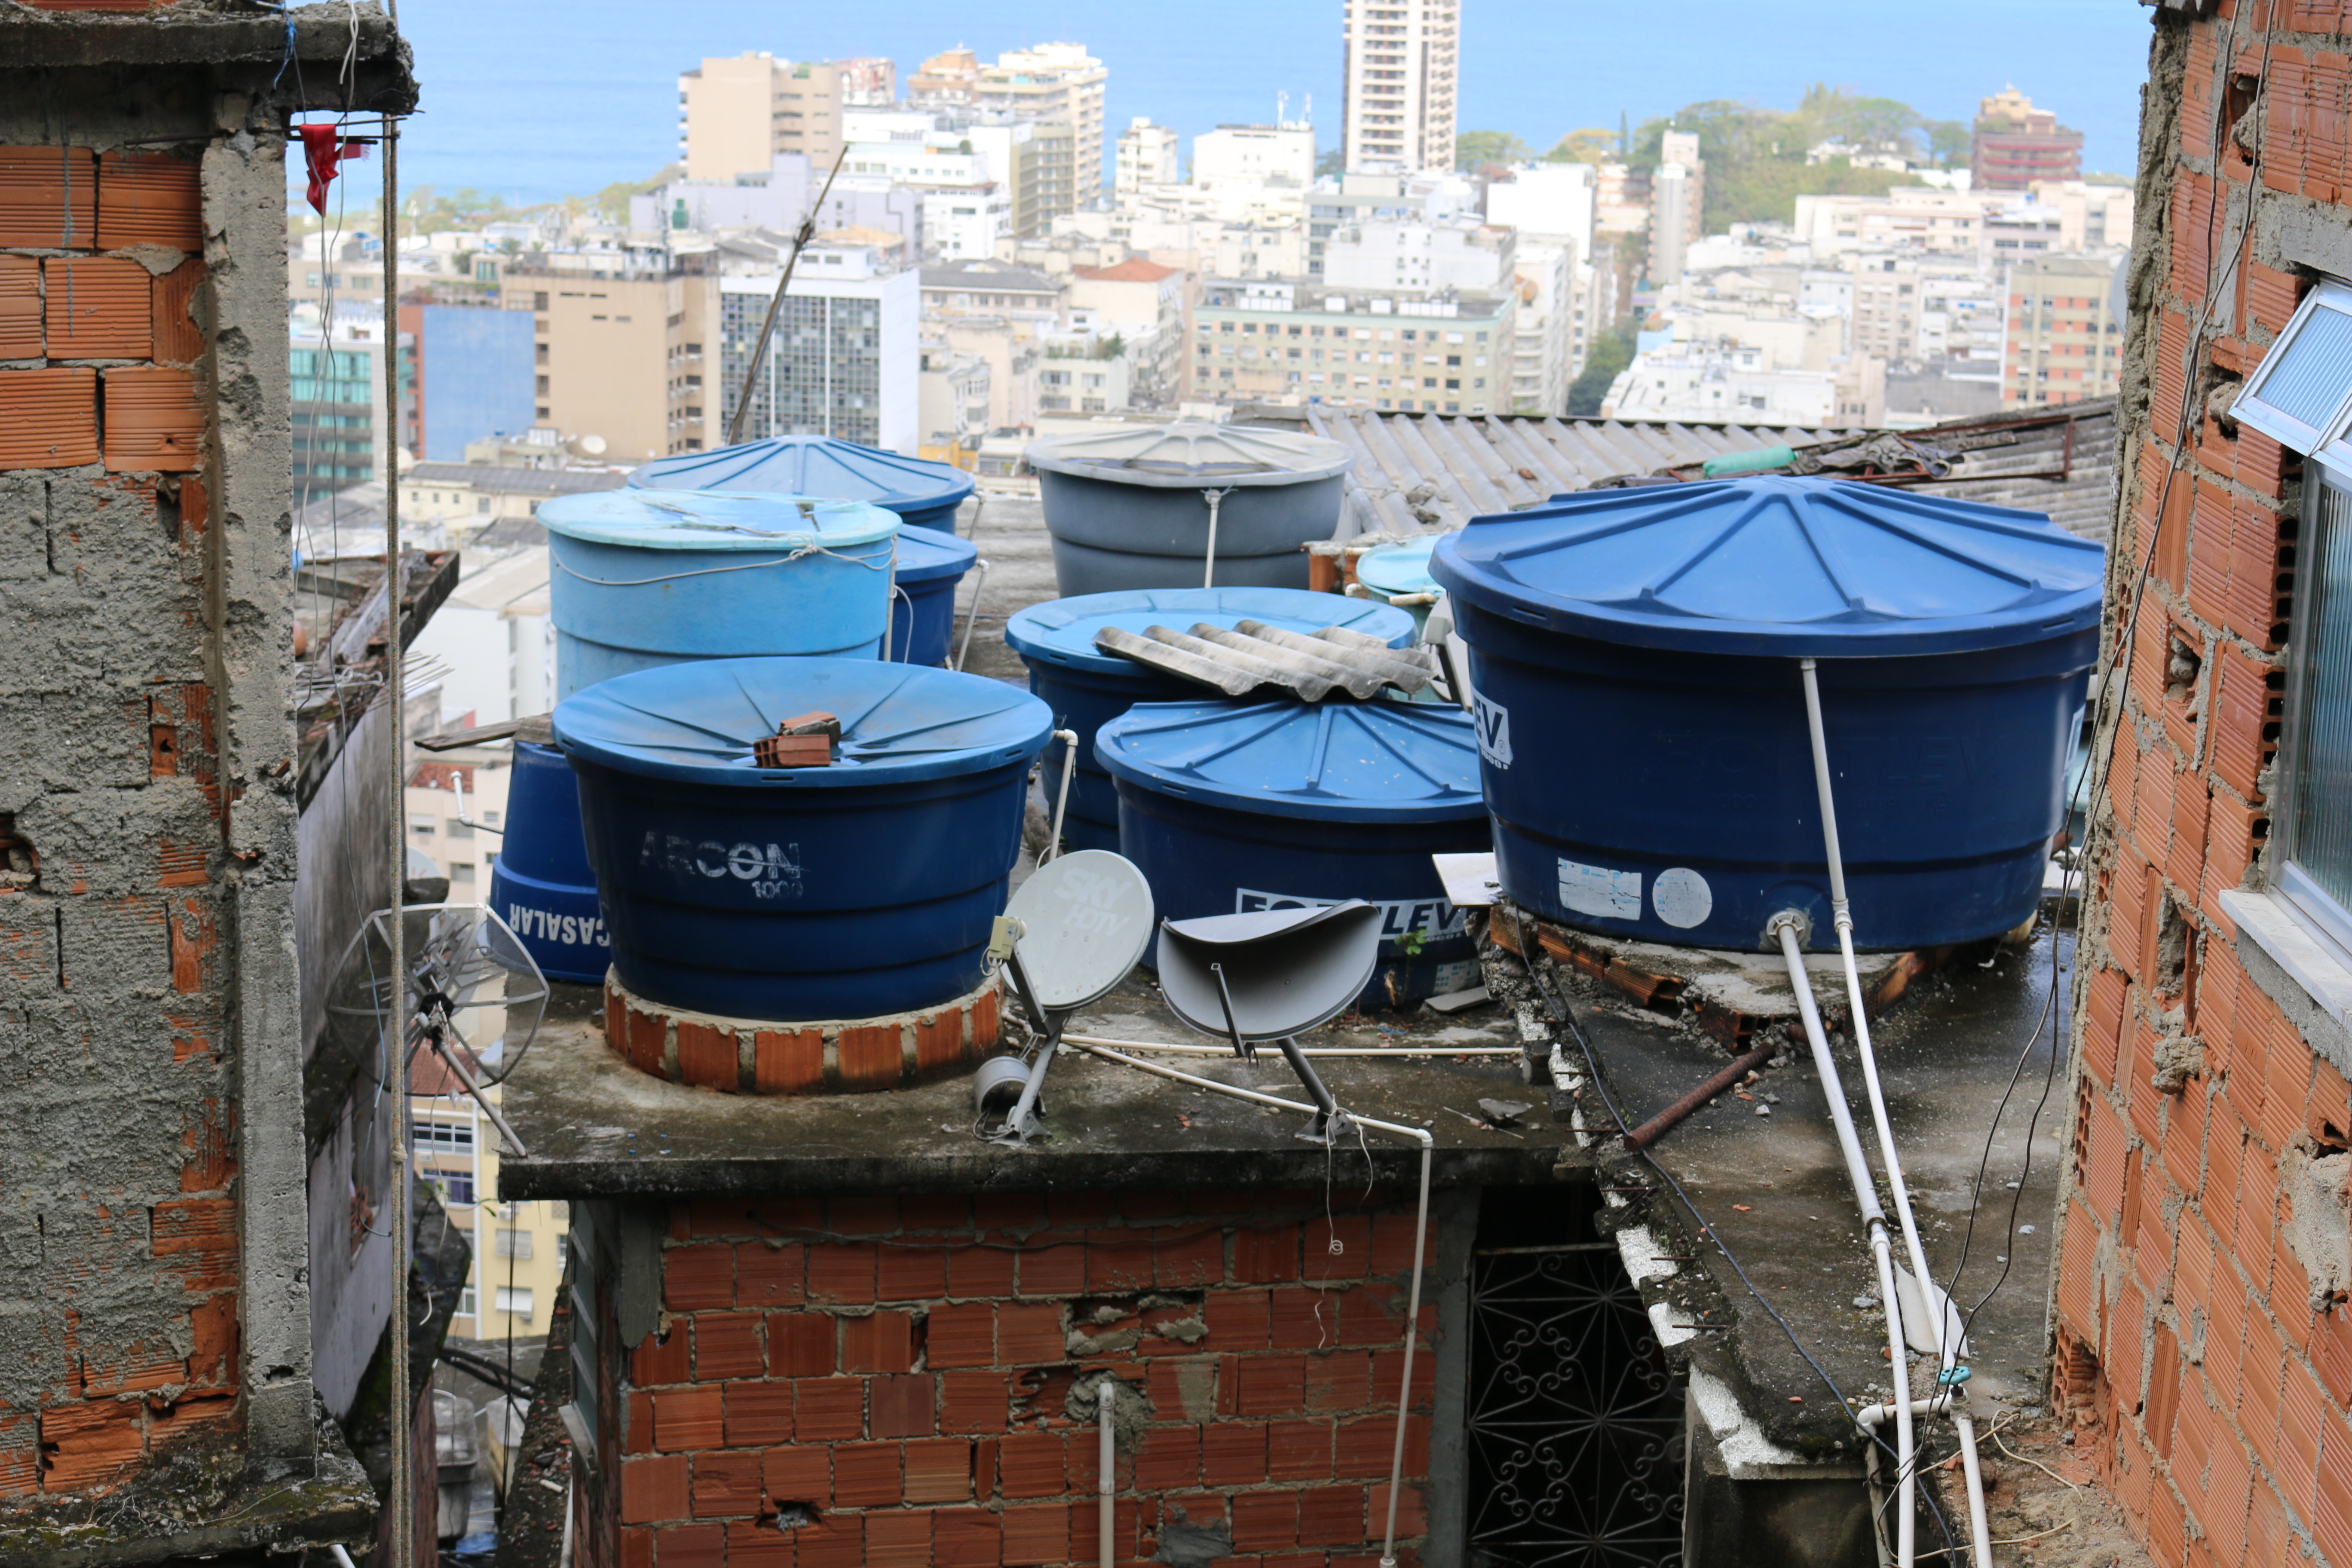 Water Quality in Rio: Favelas